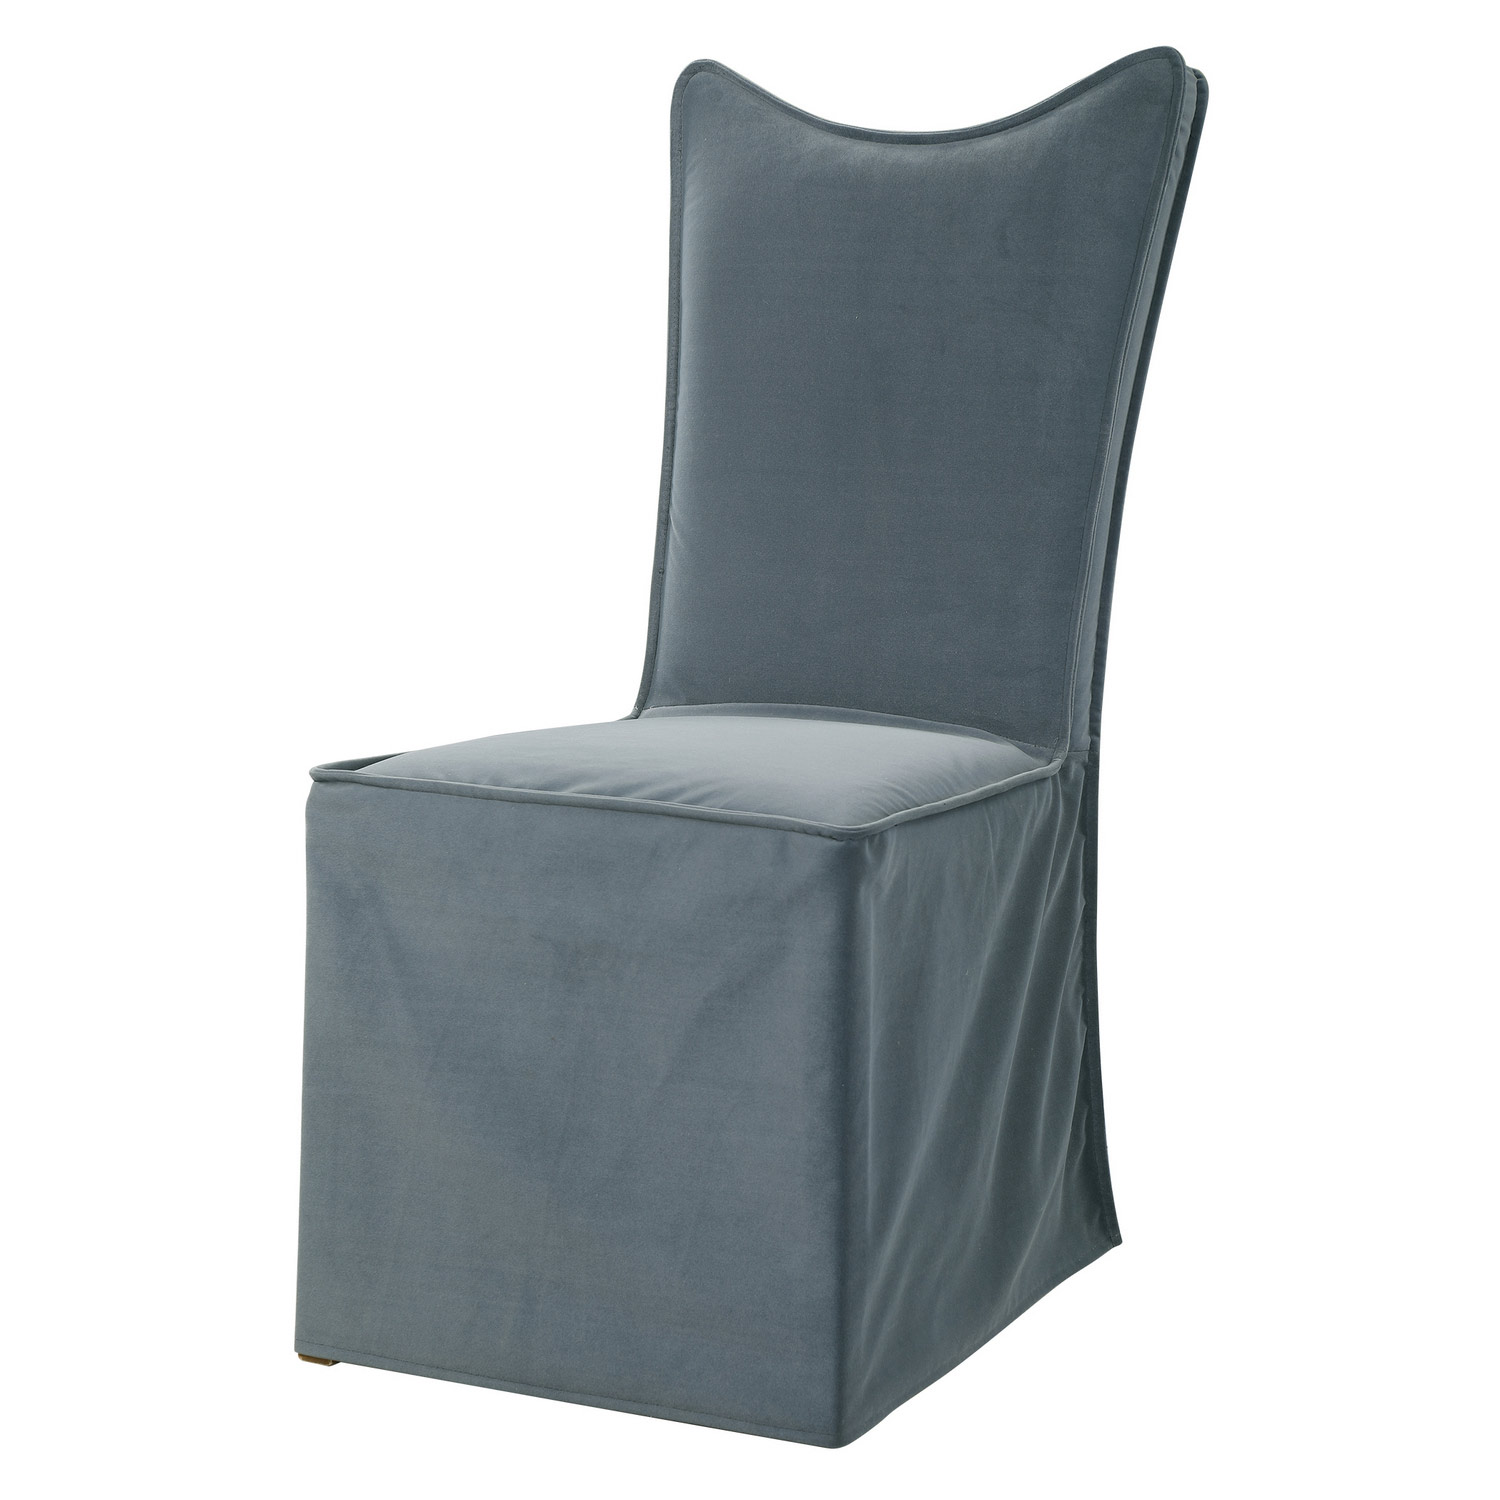 Uttermost Delroy Armless Chair - Set of 2 - Gray